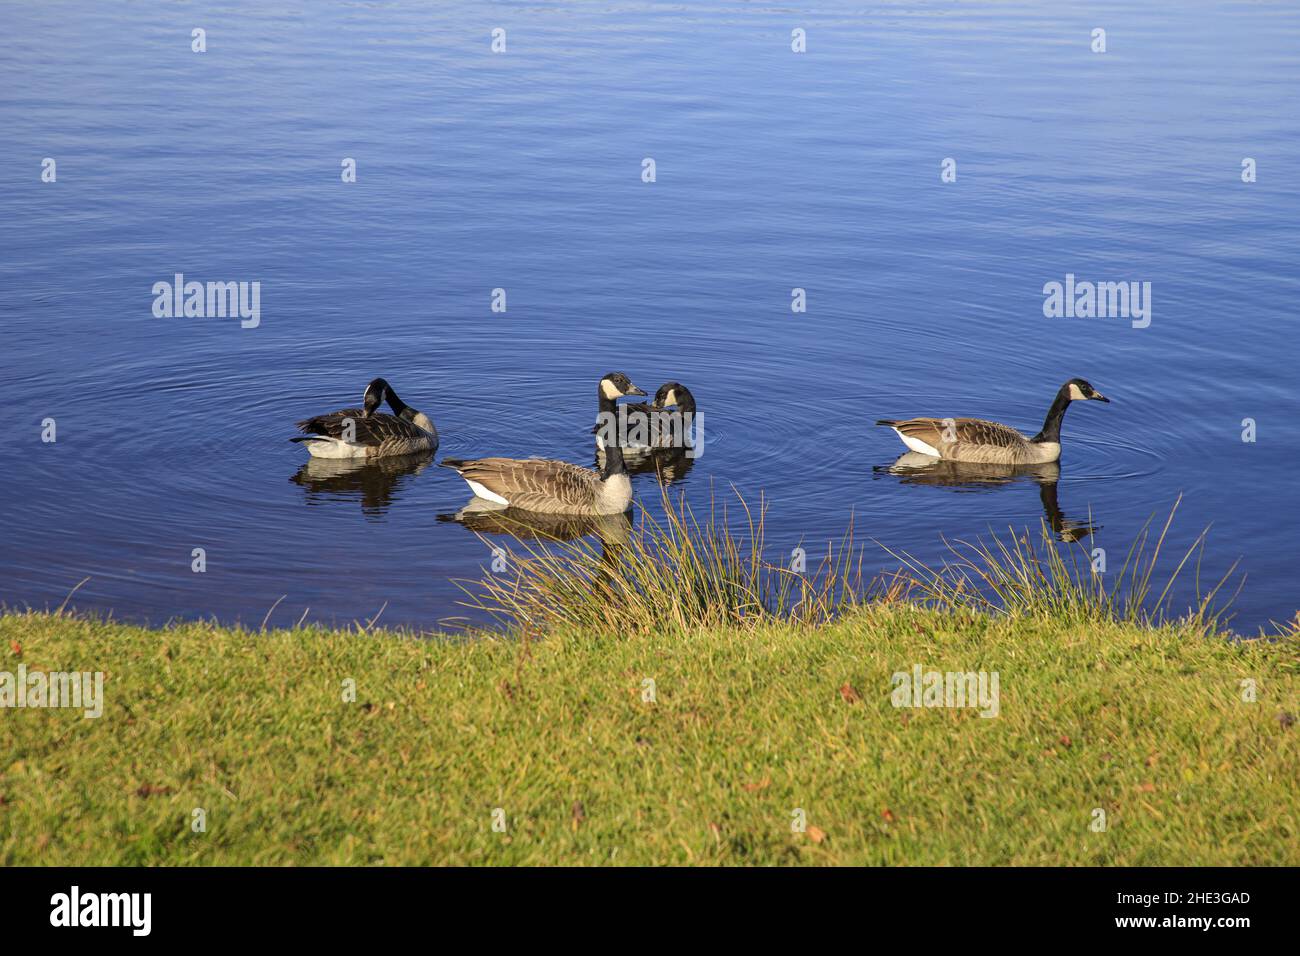 Small Group Of Canada Geese On Lake Weißenstadt Stock Photo